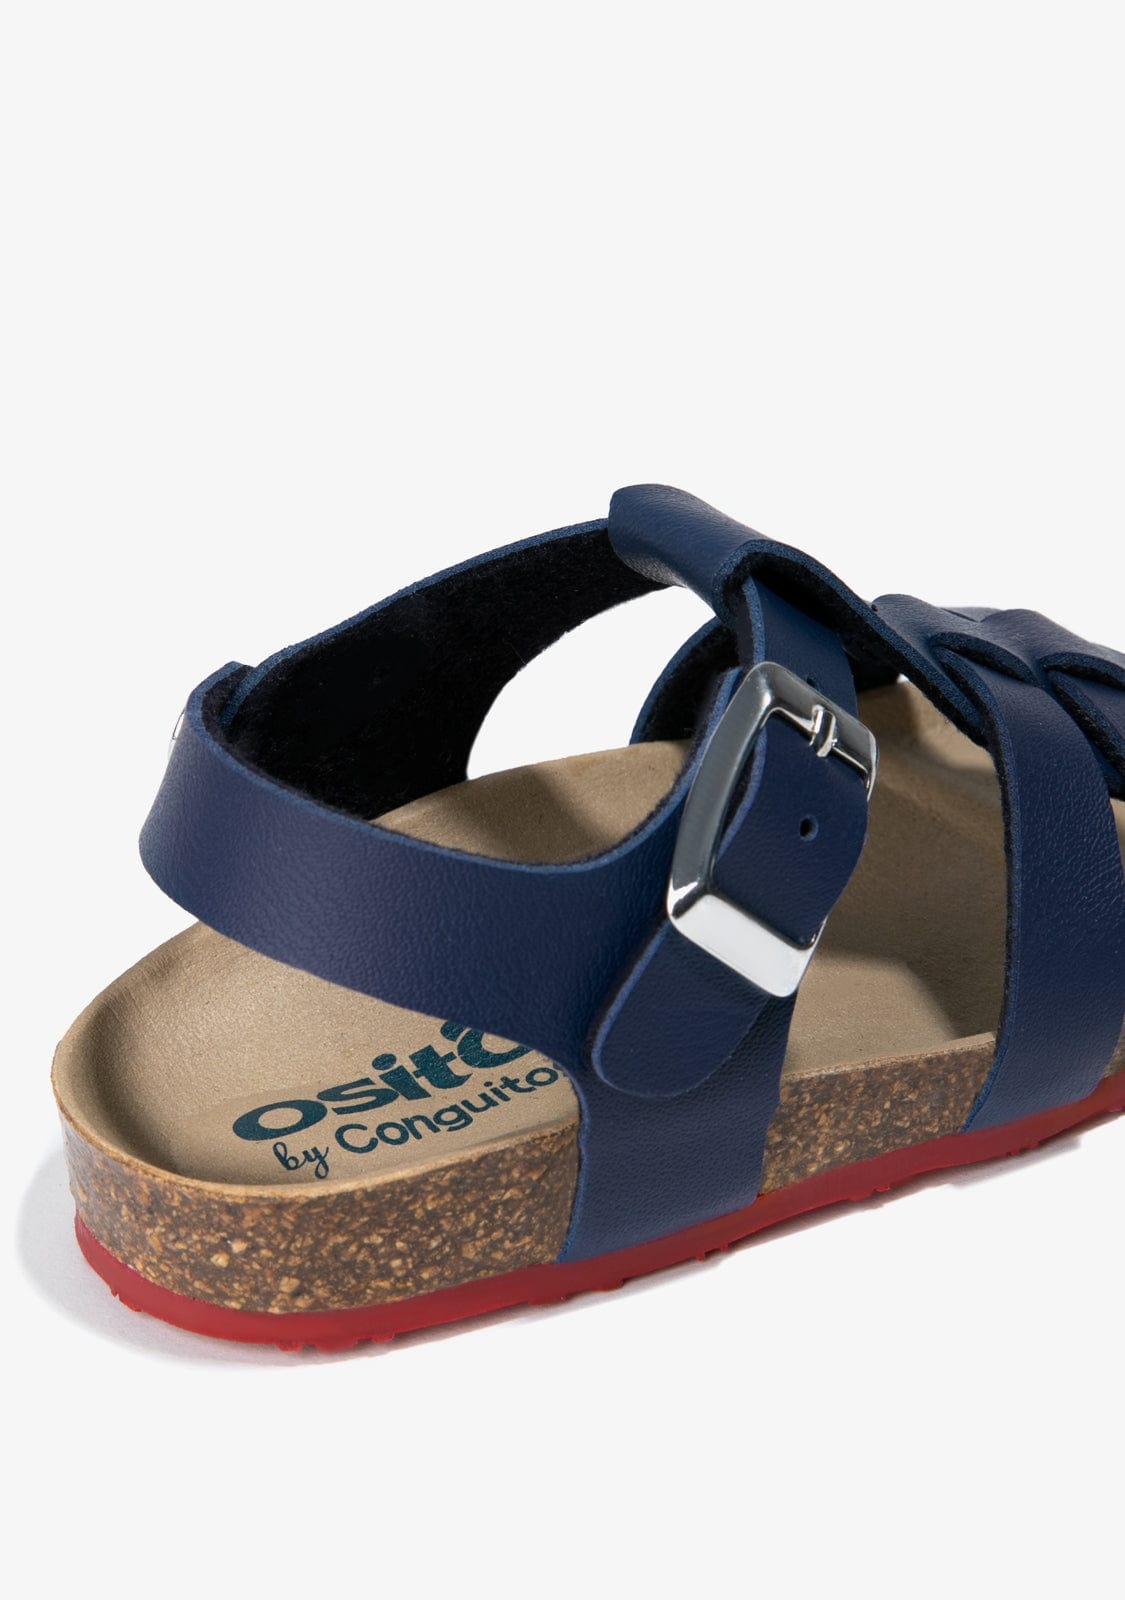 OSITO Shoes Baby's Navy Bio Buckle Sandals